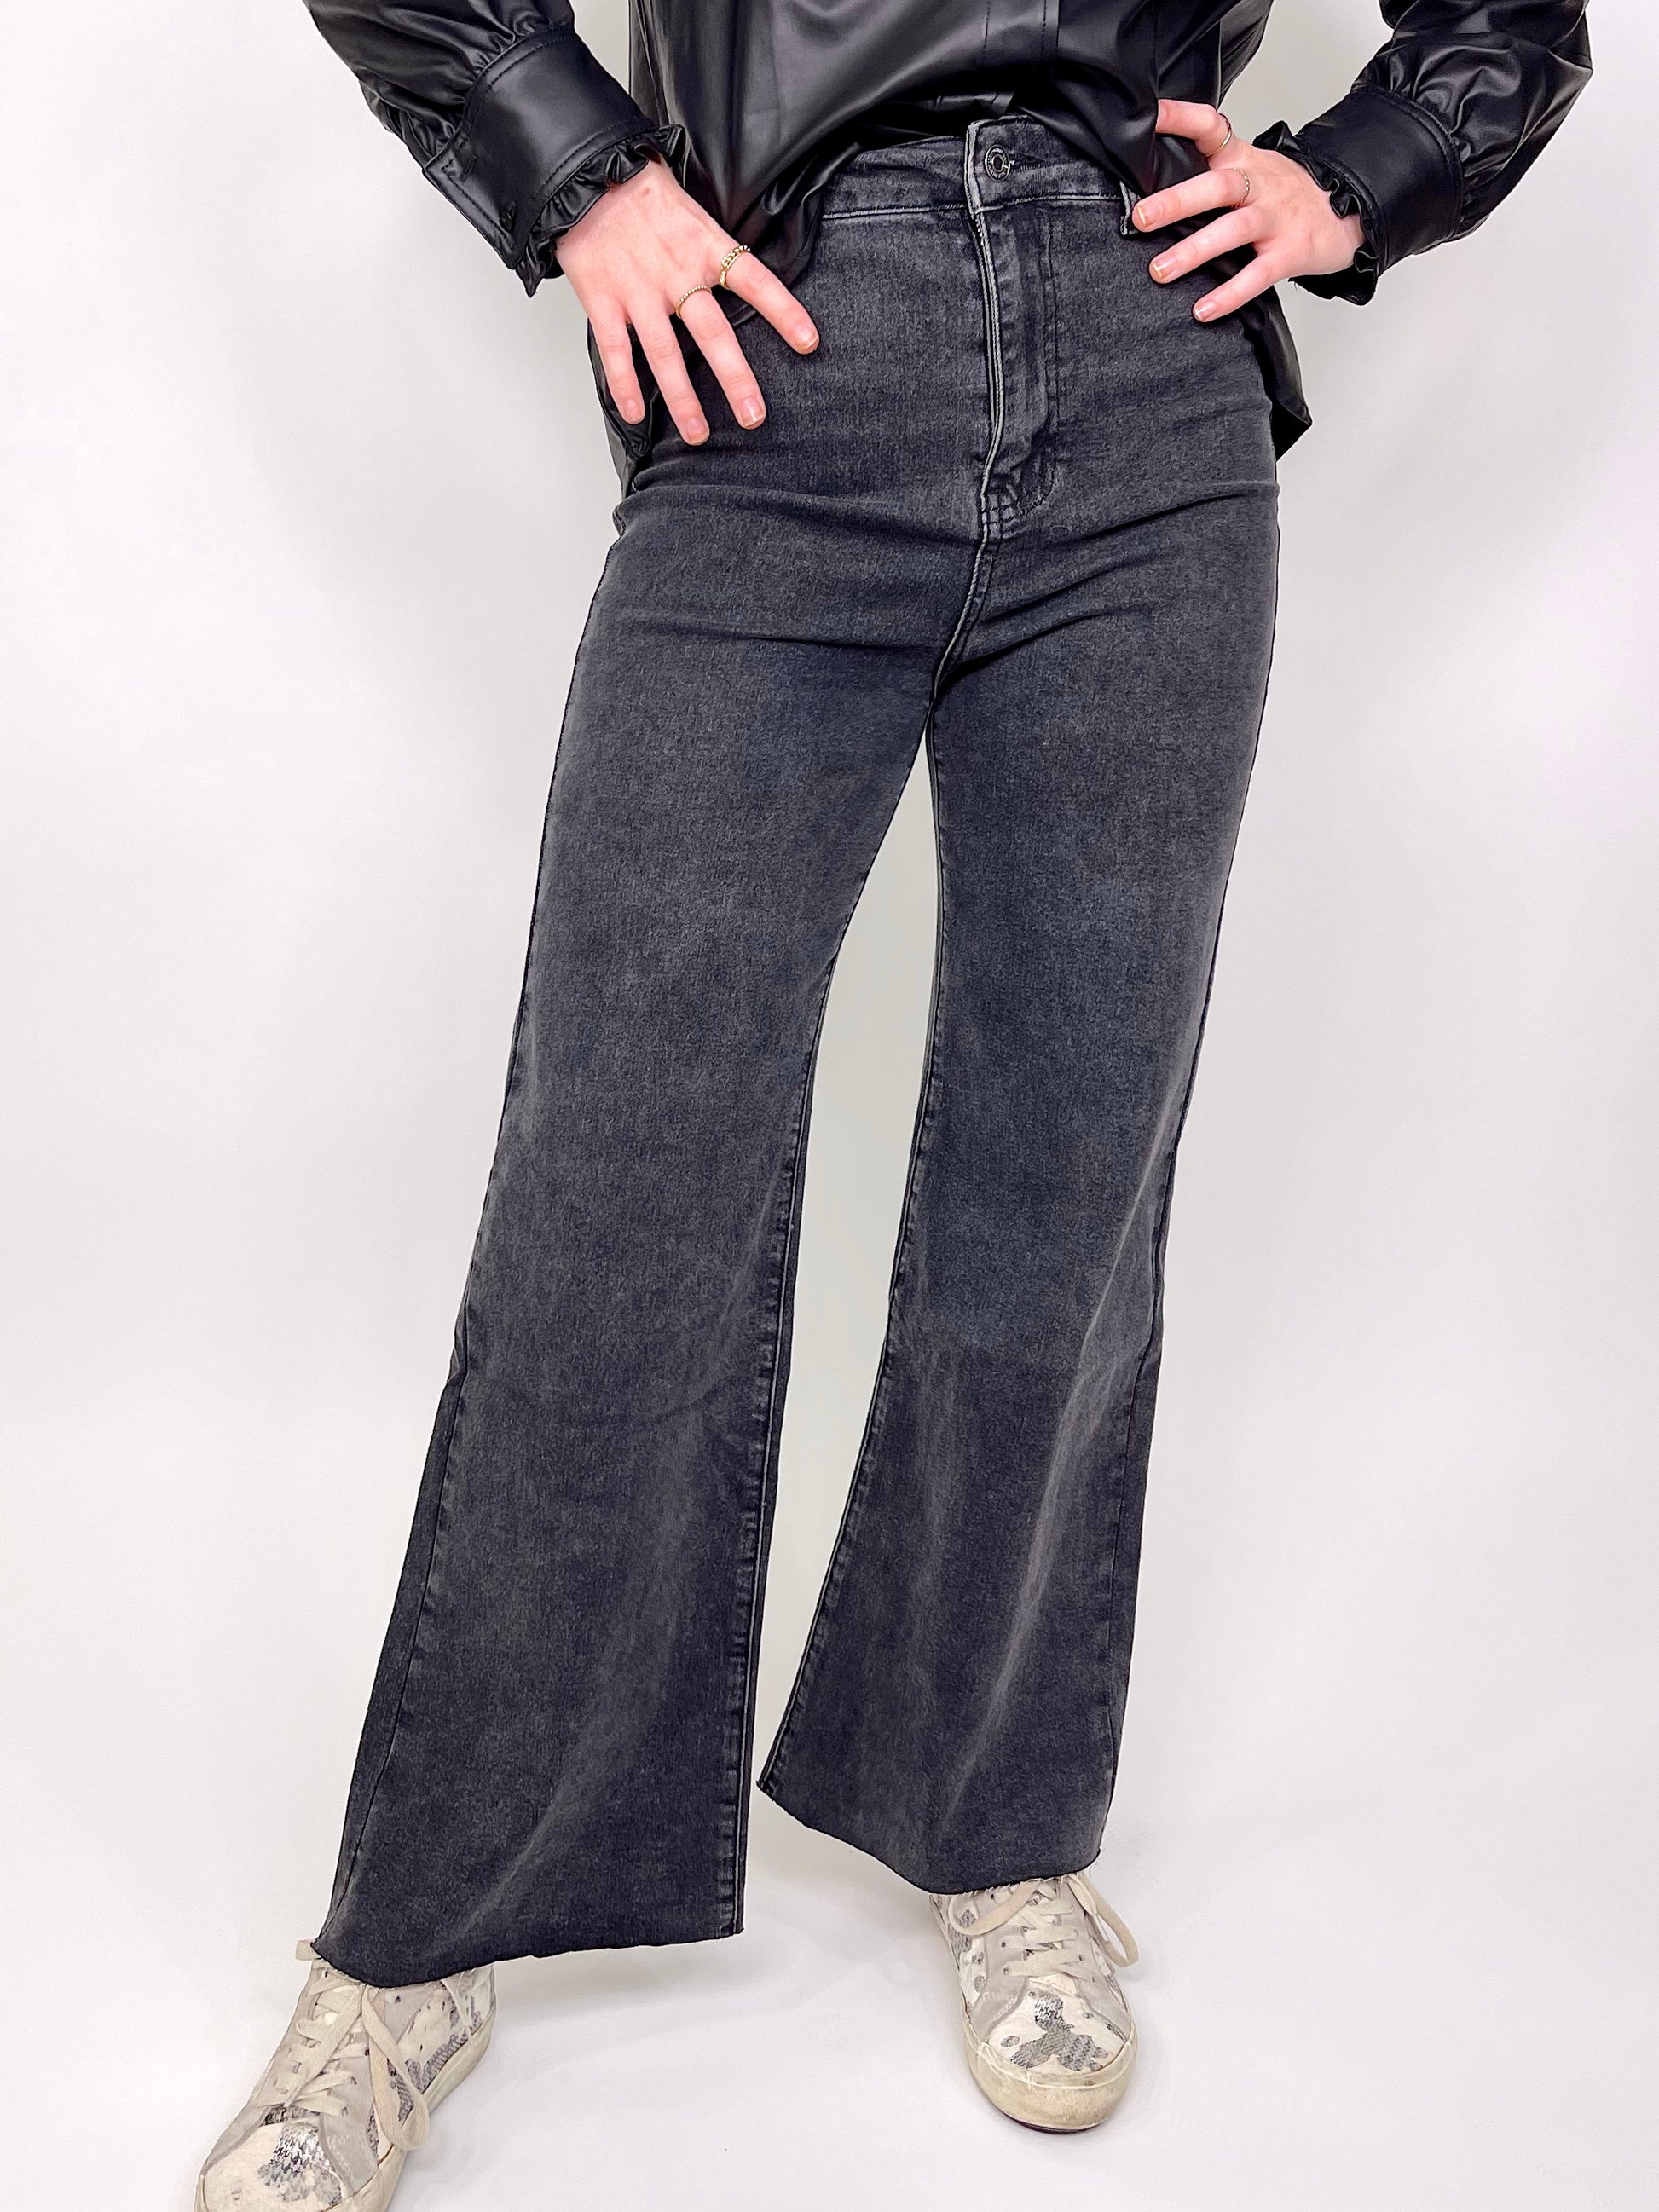 The Danielle Wide Leg Jean-Jeans-Anniewear-The Village Shoppe, Women’s Fashion Boutique, Shop Online and In Store - Located in Muscle Shoals, AL.